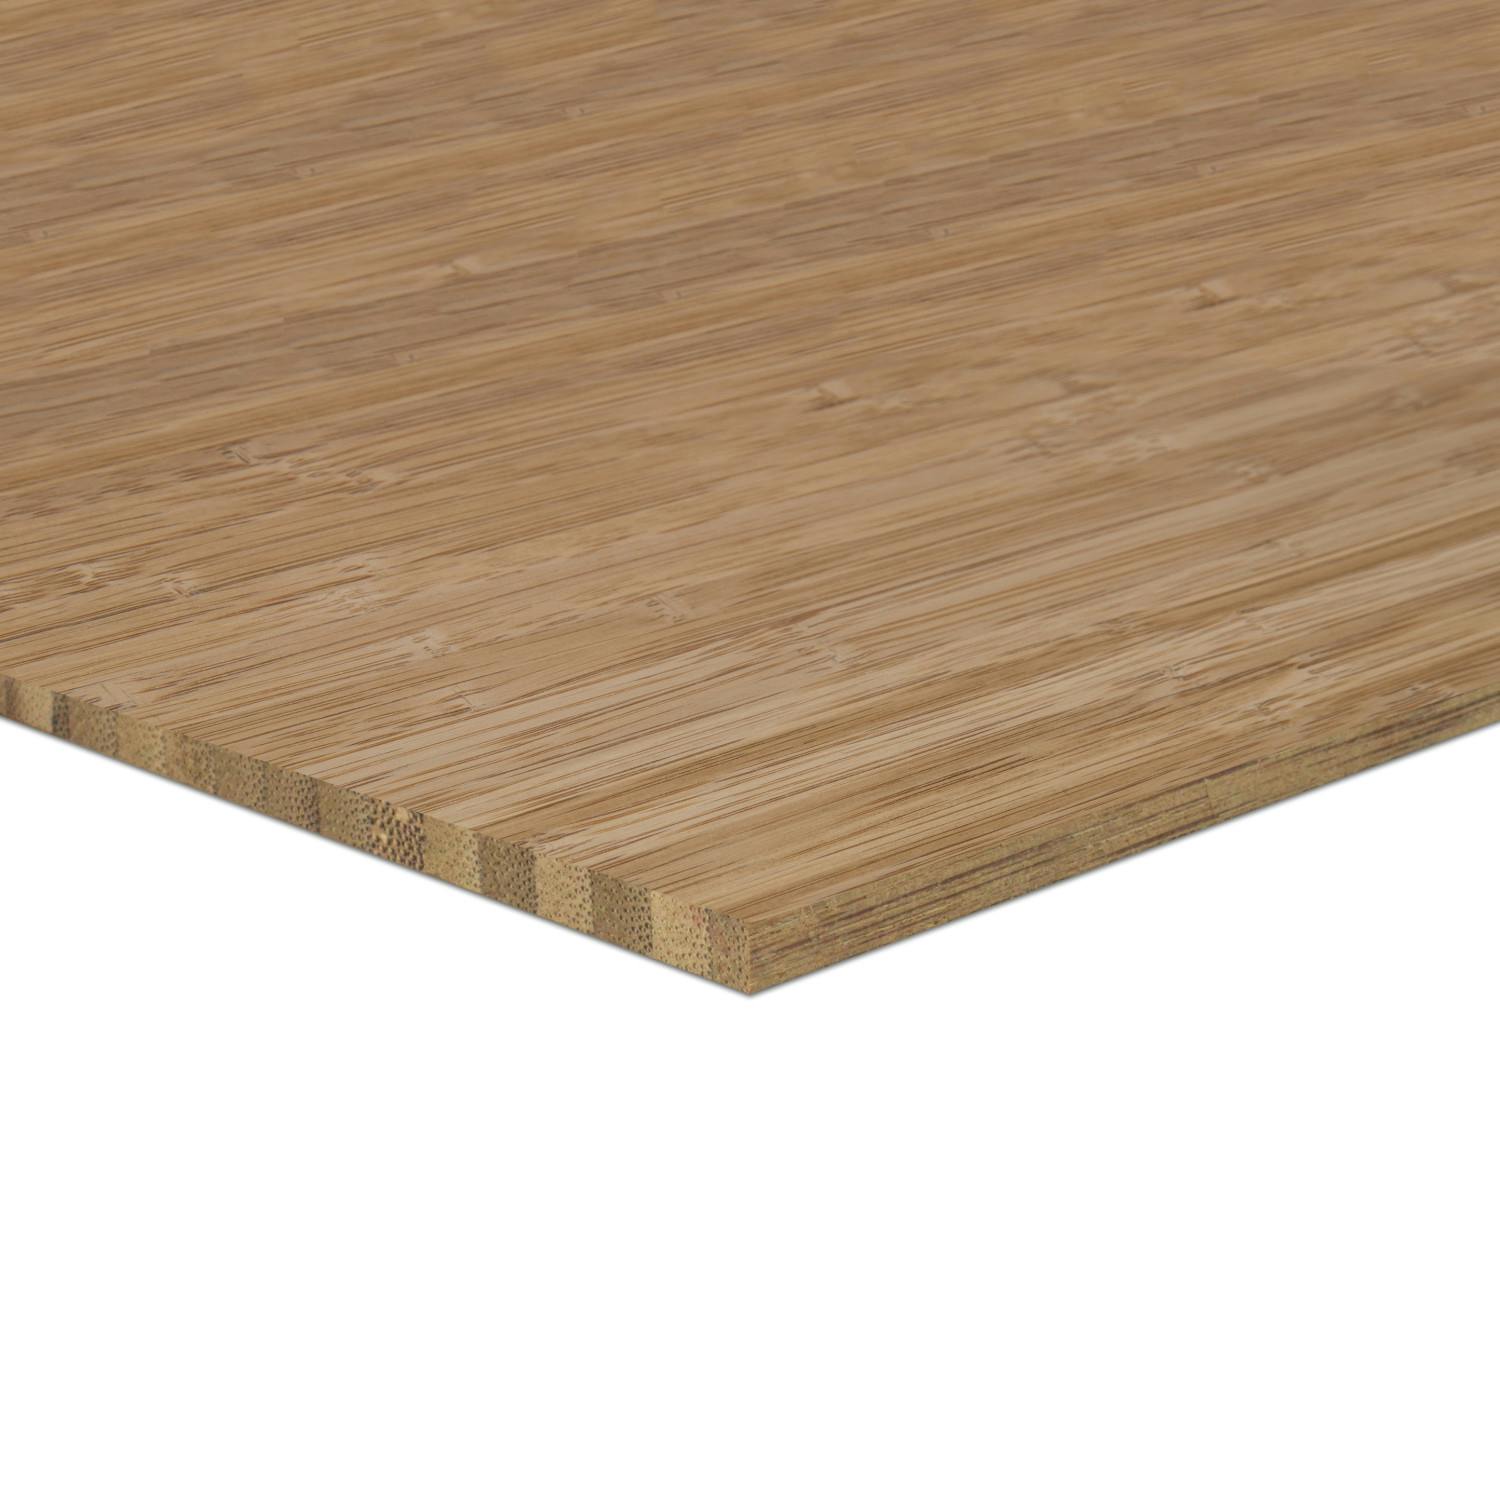 PLY 1/4in. 4' x 8' - Carbonized Vertical 1 PLY